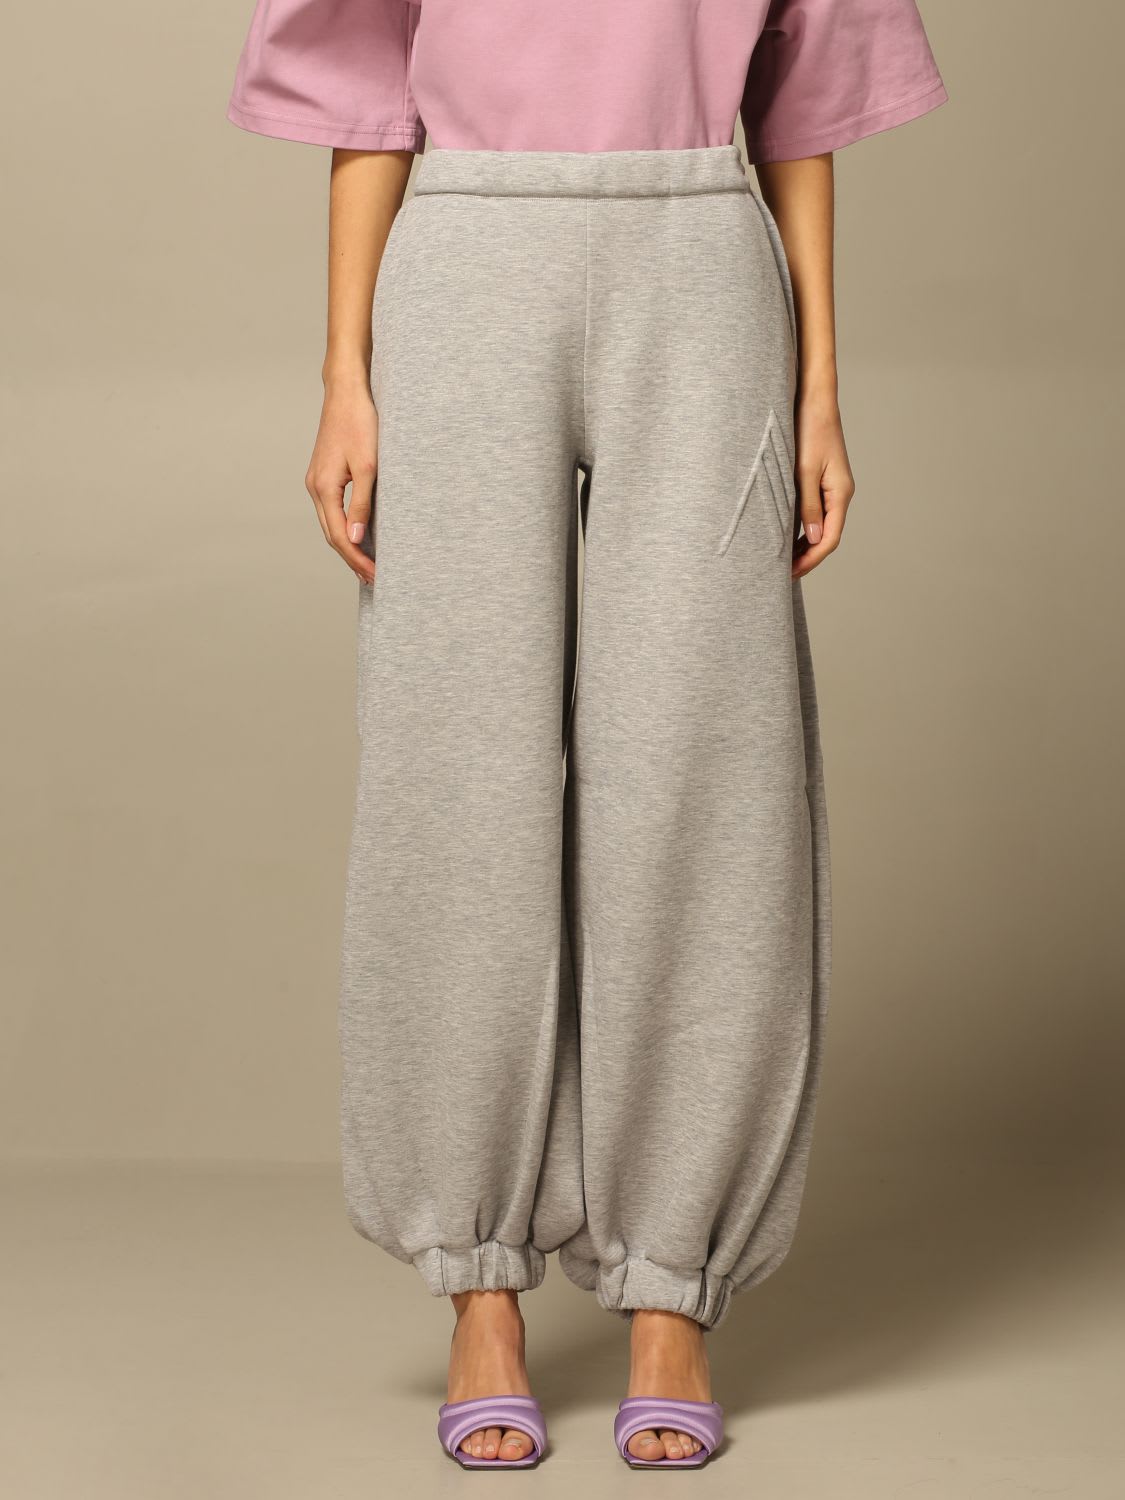 The Attico Pants Carter Life At Large Capsule The Attico Sweatpants In Cotton